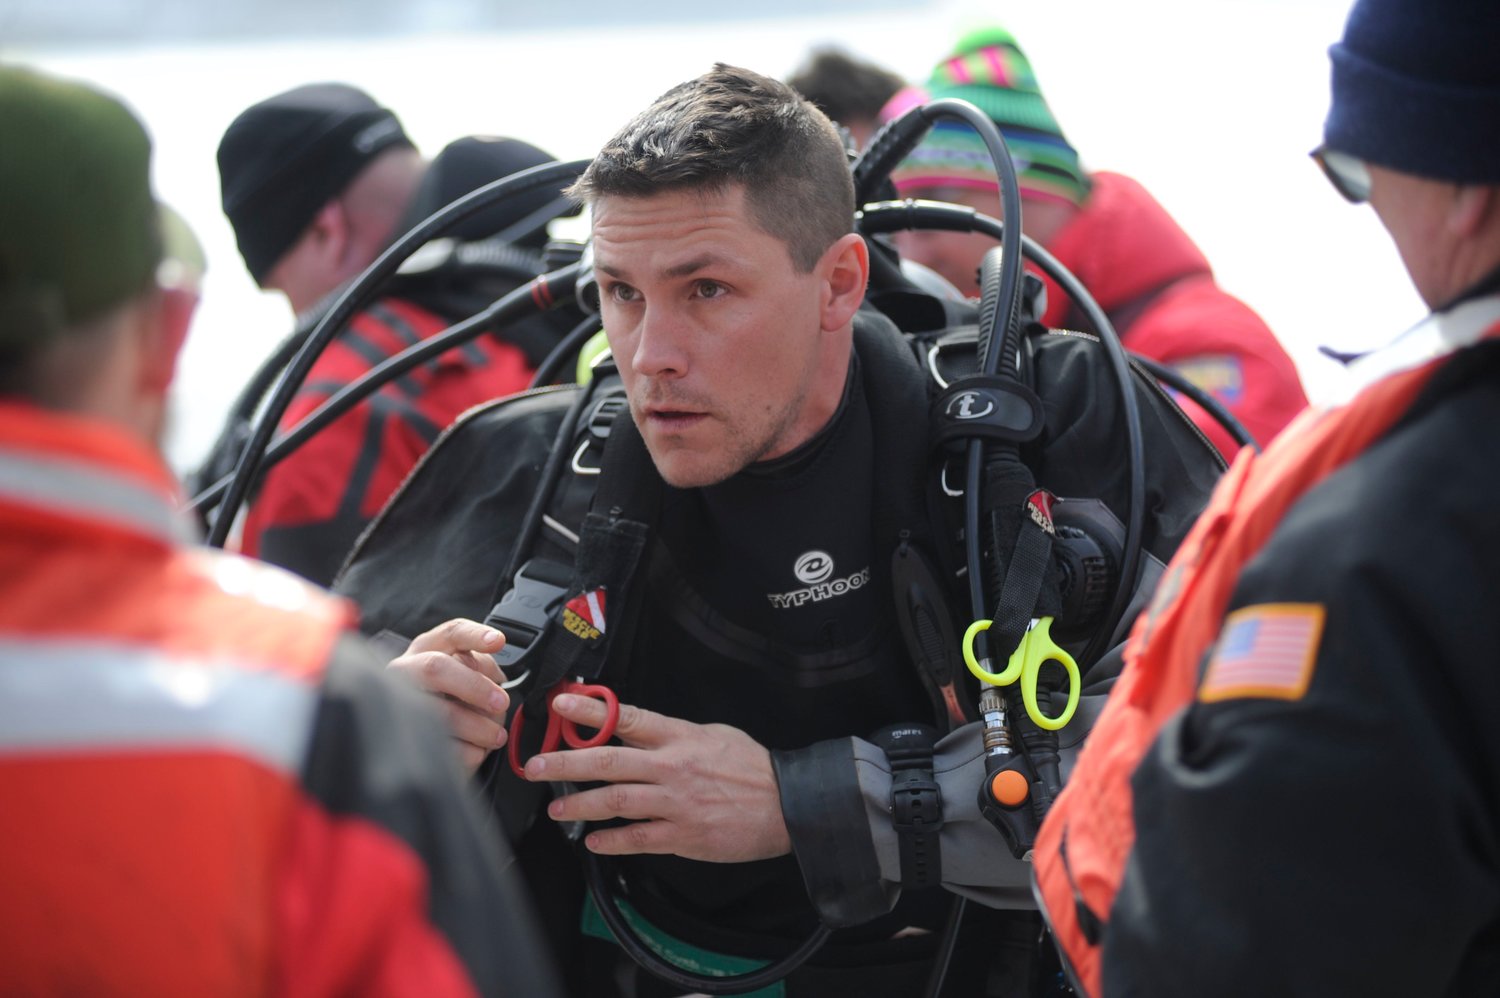 Thomas Davies, a volunteer firefighter with the Youngsville Fire Department and a member of the Sullivan County Dive & Rescue team, was designated as the primary diver during the recovery operation at White Lake.